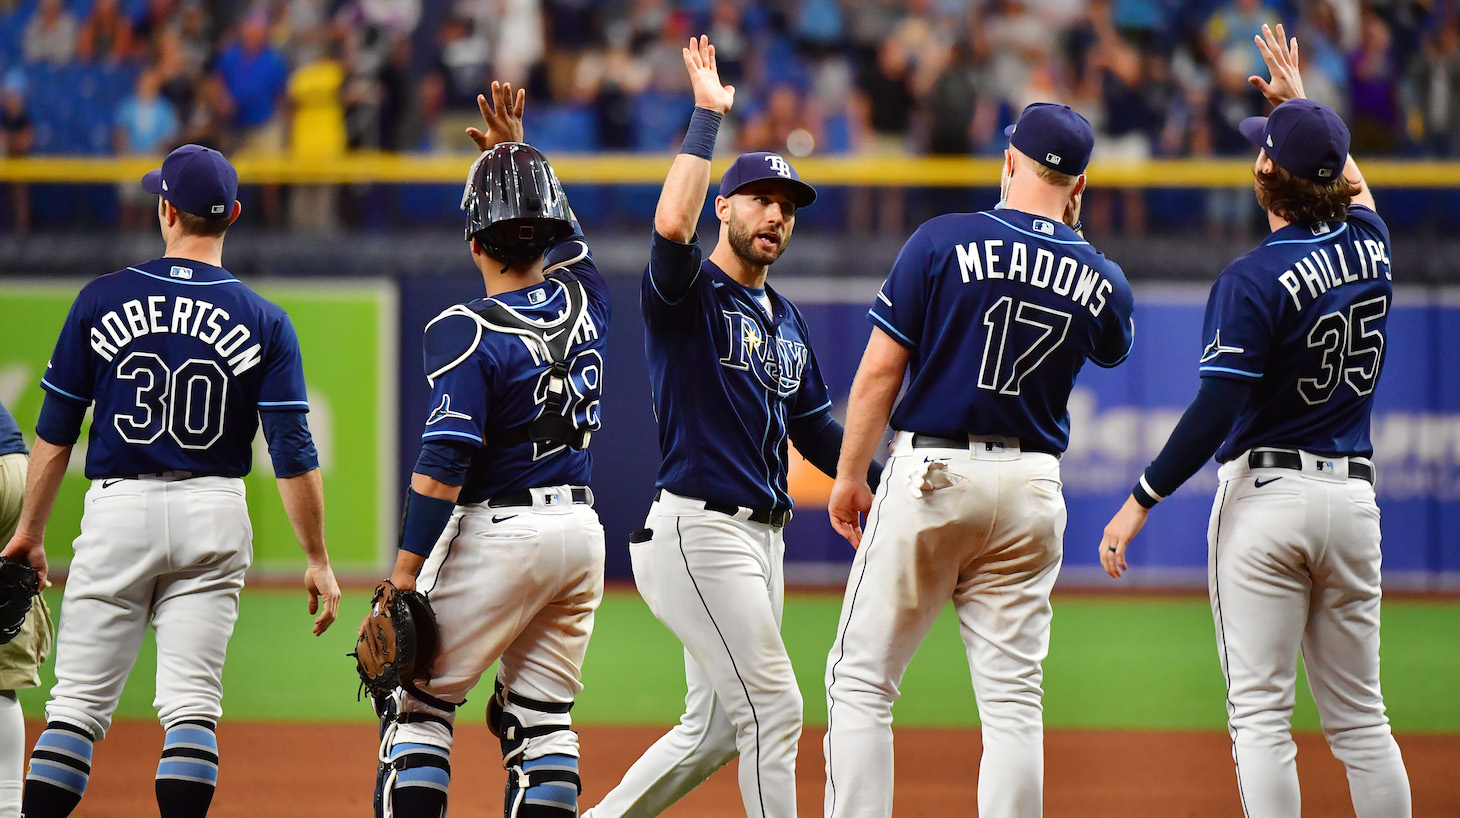 ST PETERSBURG, FLORIDA - SEPTEMBER 22: Kevin Kiermaier #39 of the Tampa Bay Rays celebrates with teammates after defeating the Toronto Blue Jays 7-1 to clinch a playoff berth at Tropicana Field on September 22, 2021 in St Petersburg, Florida. (Photo by Julio Aguilar/Getty Images)